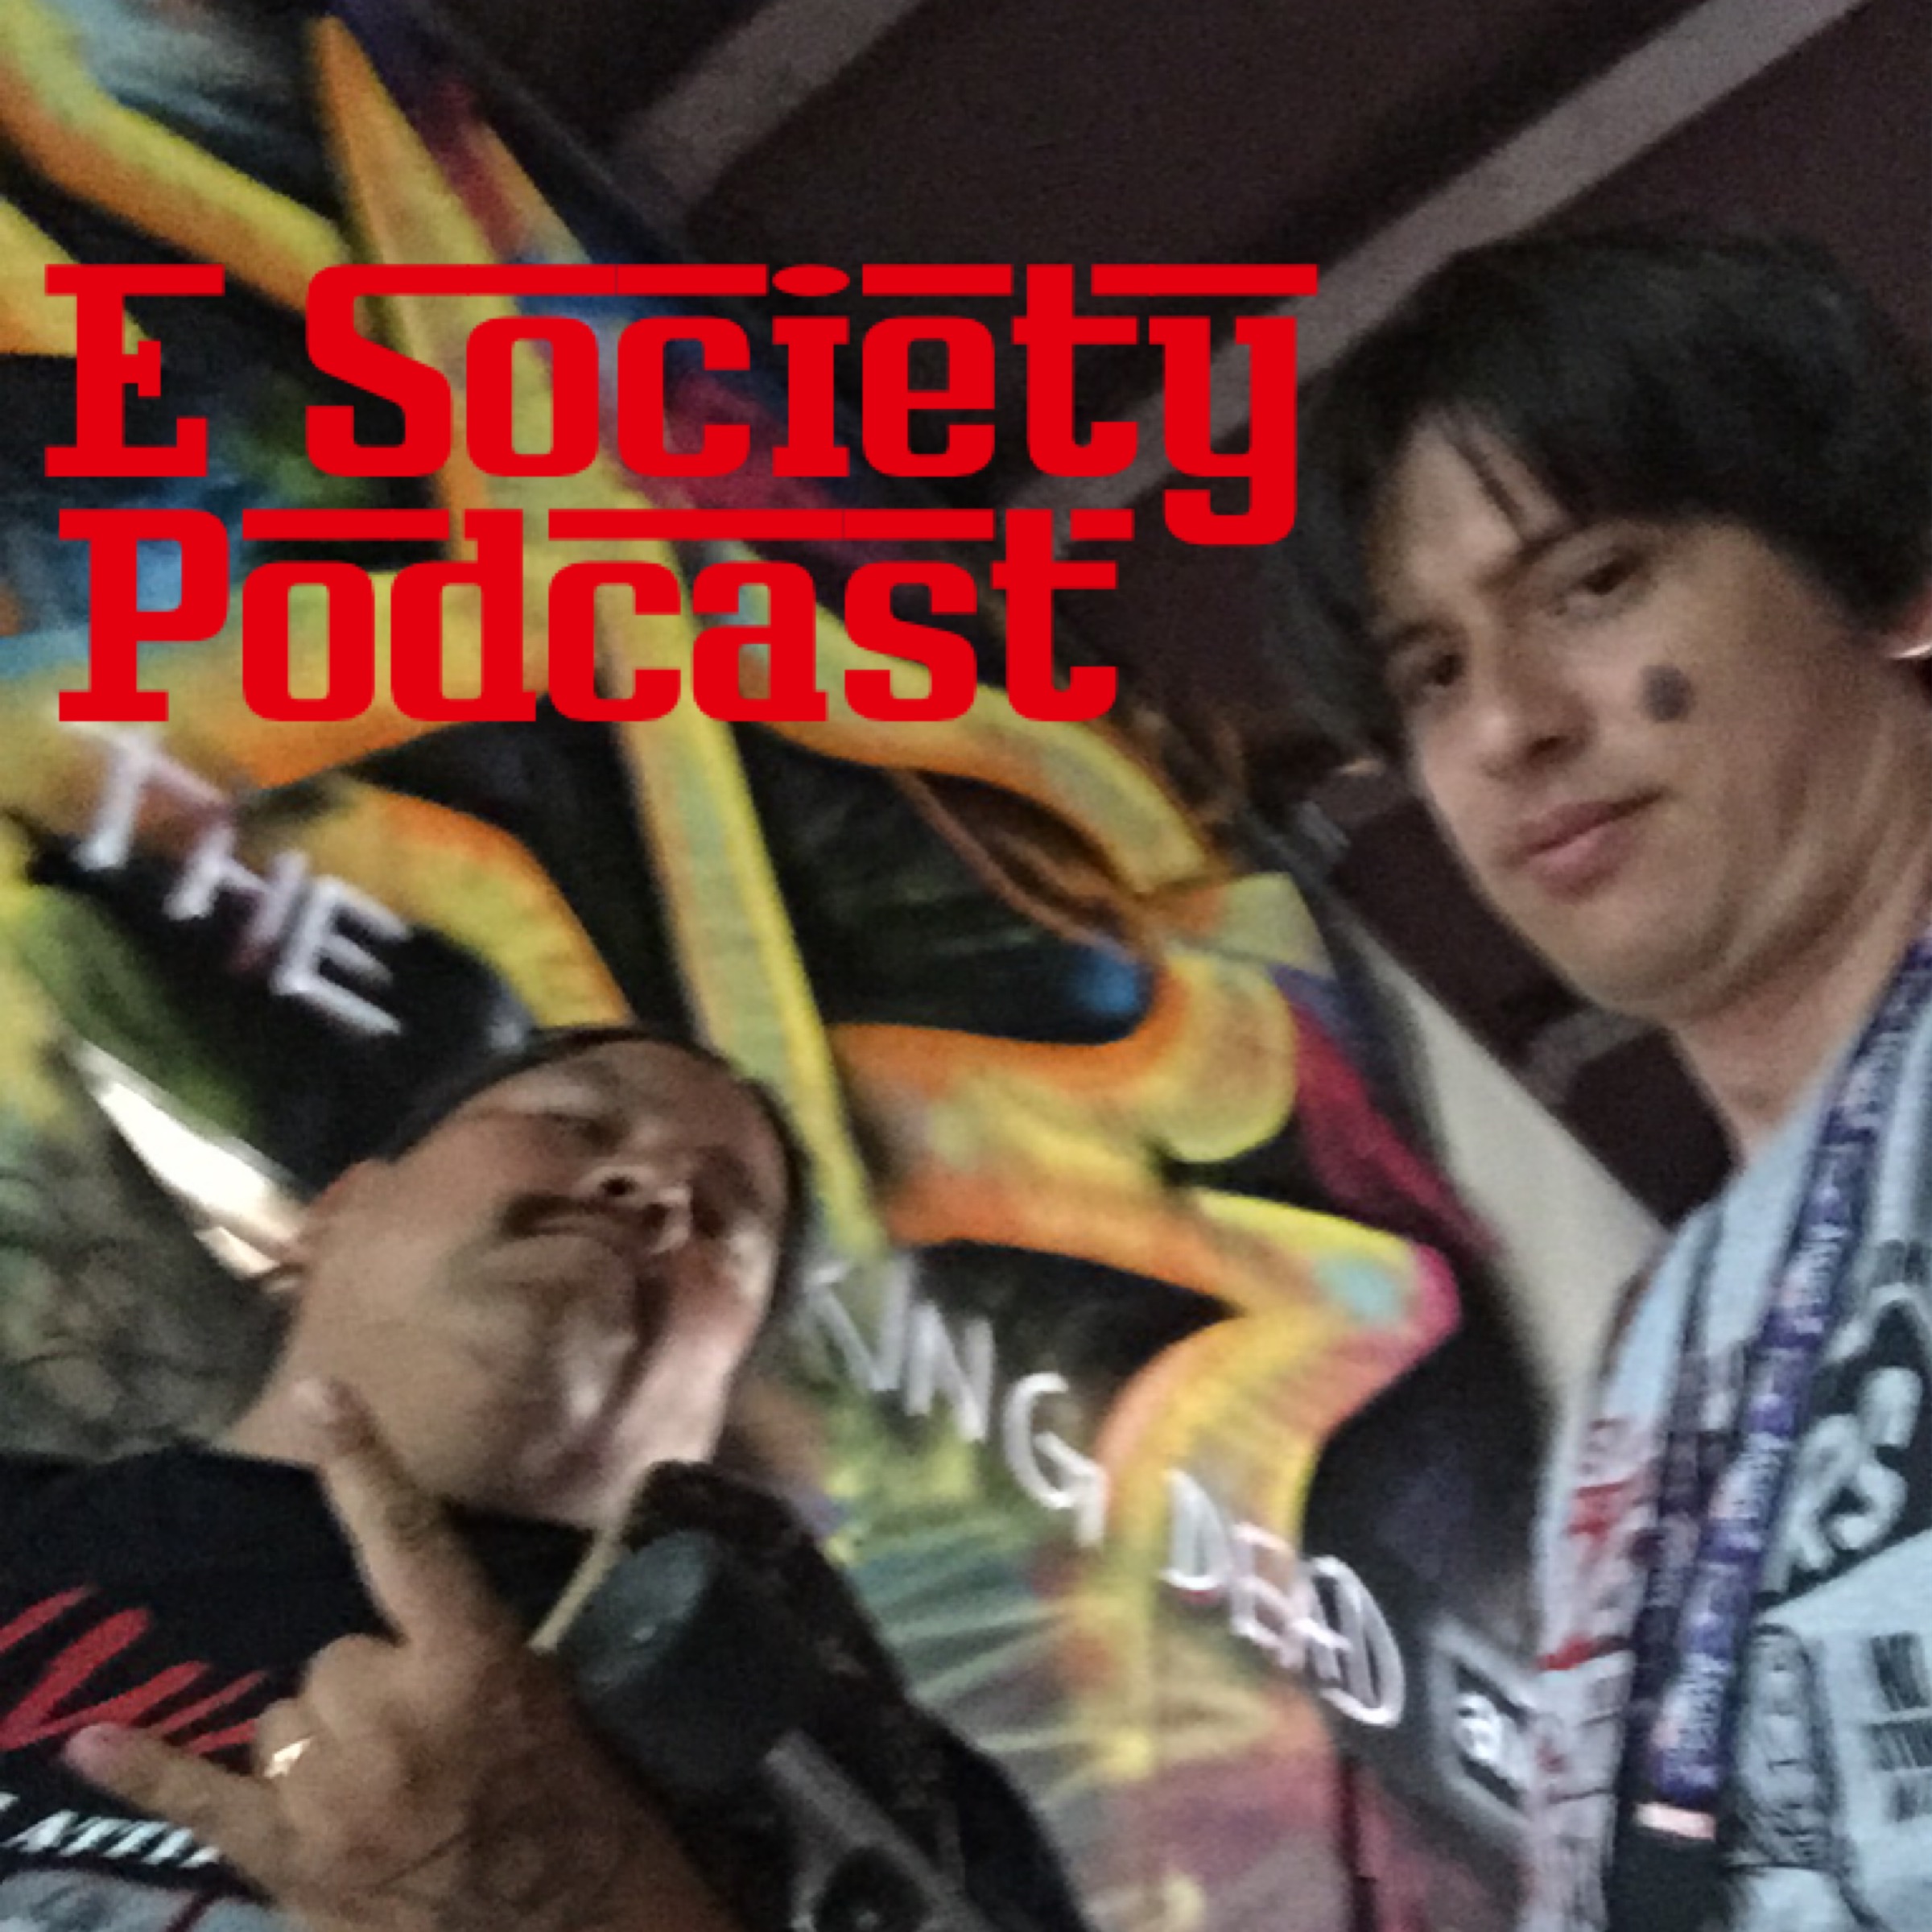 E Society Podcast - Ep. 81: 2017 Our Year in Review 